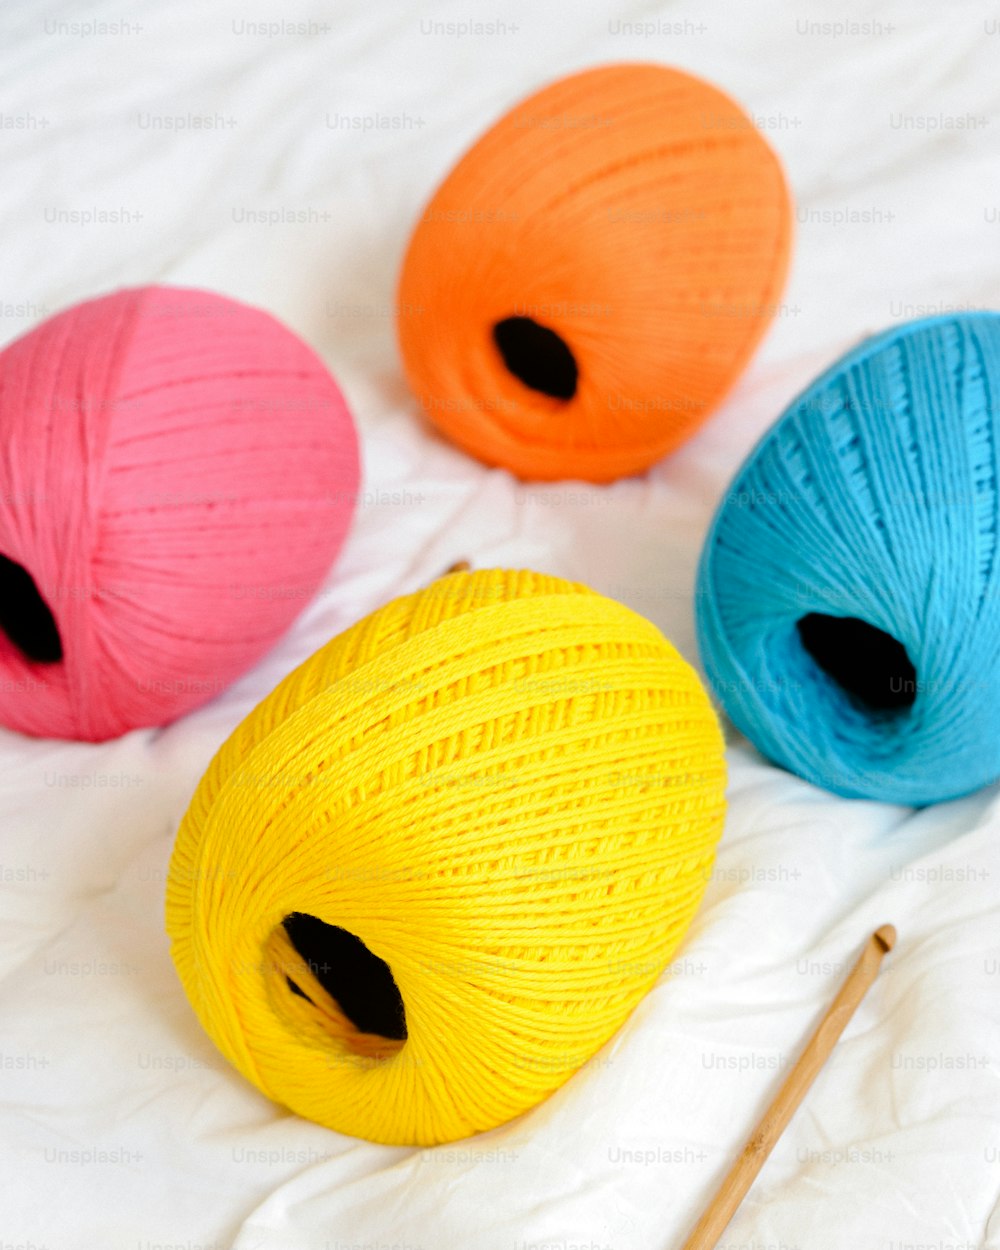 three balls of yarn and a knitting needle on a bed